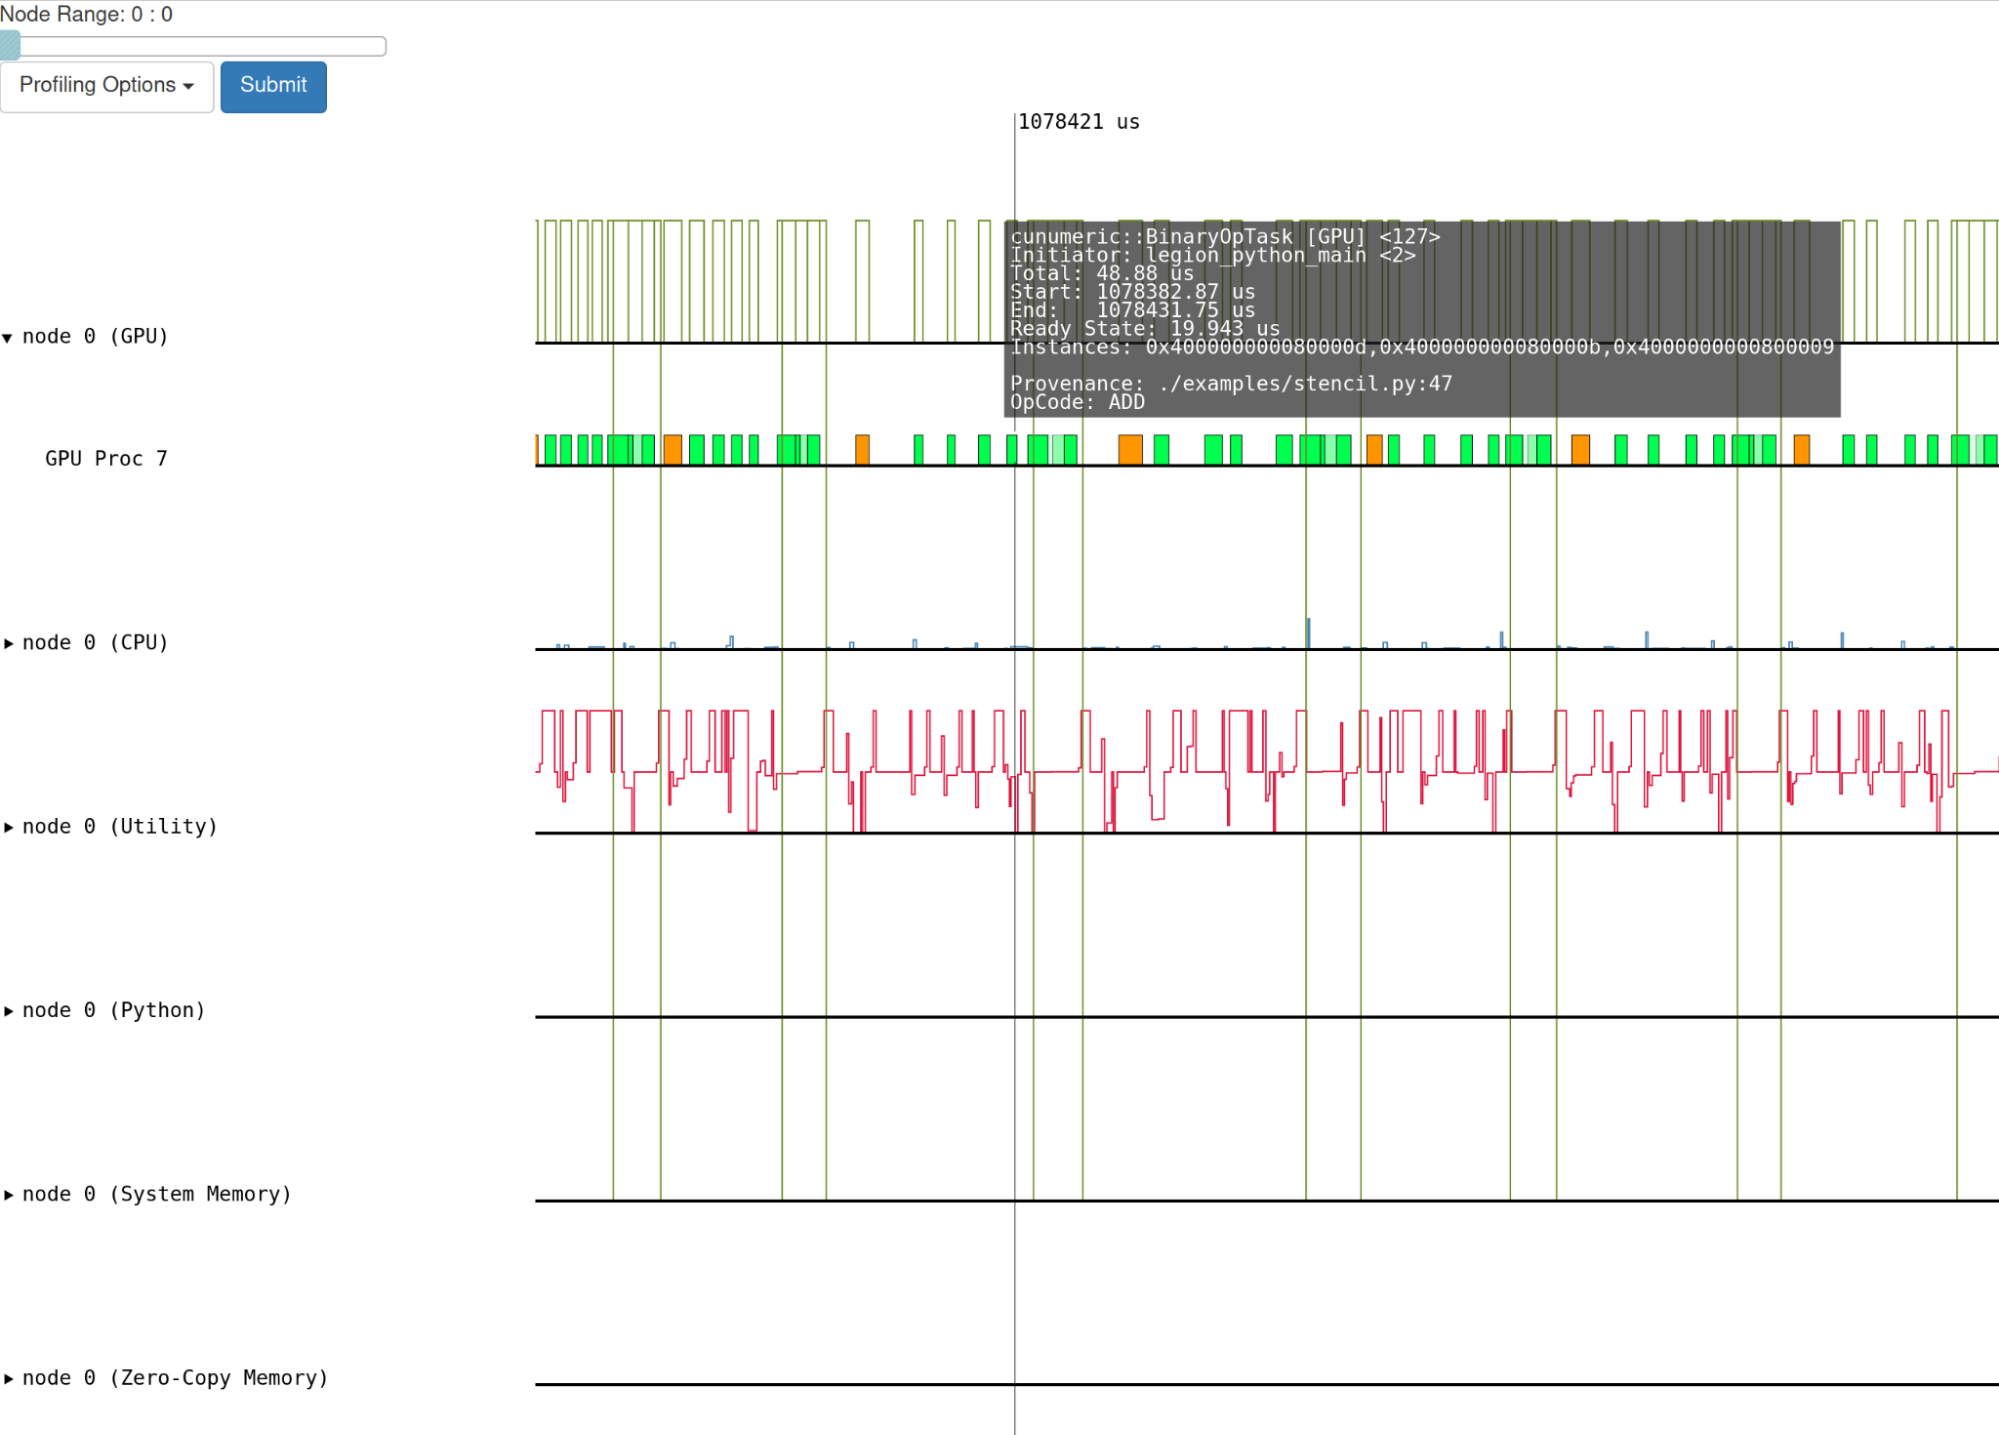 A screen capture of the output of a Legate profiler which shows multiple green and orange blocks representing the parallel execution of each GPU process as well as several more graphs representing Utility processor, Python code execution, memory allocation.